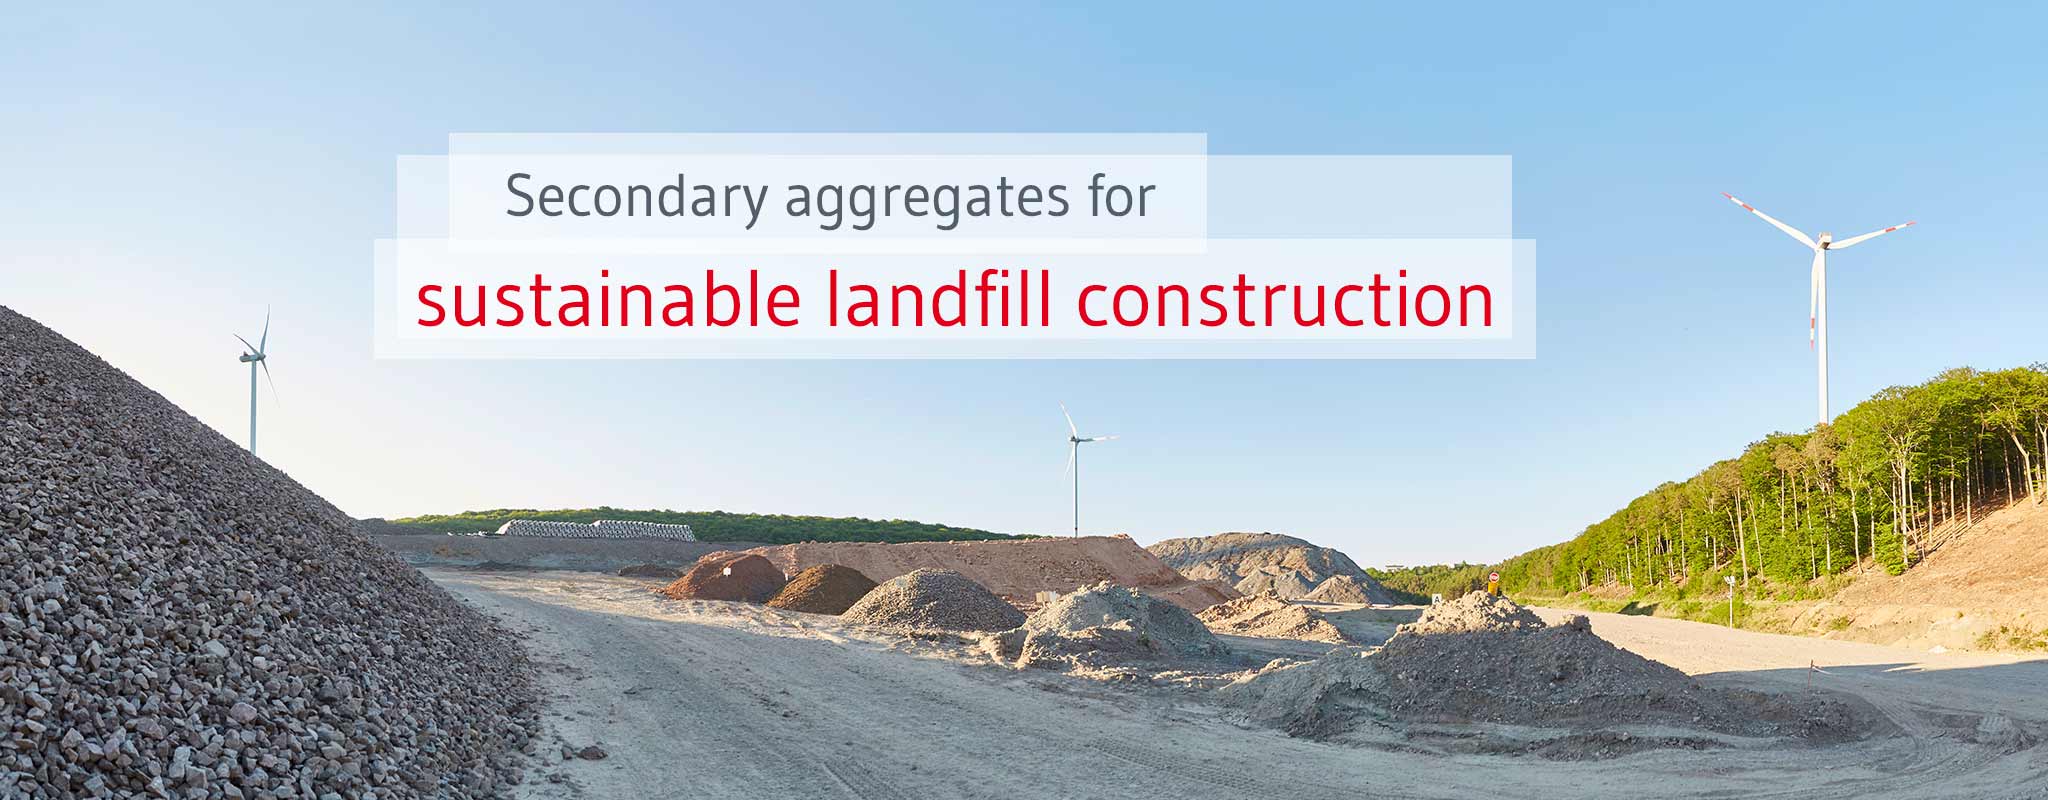 Sustainable landfill construction with secondary landfill materials. 